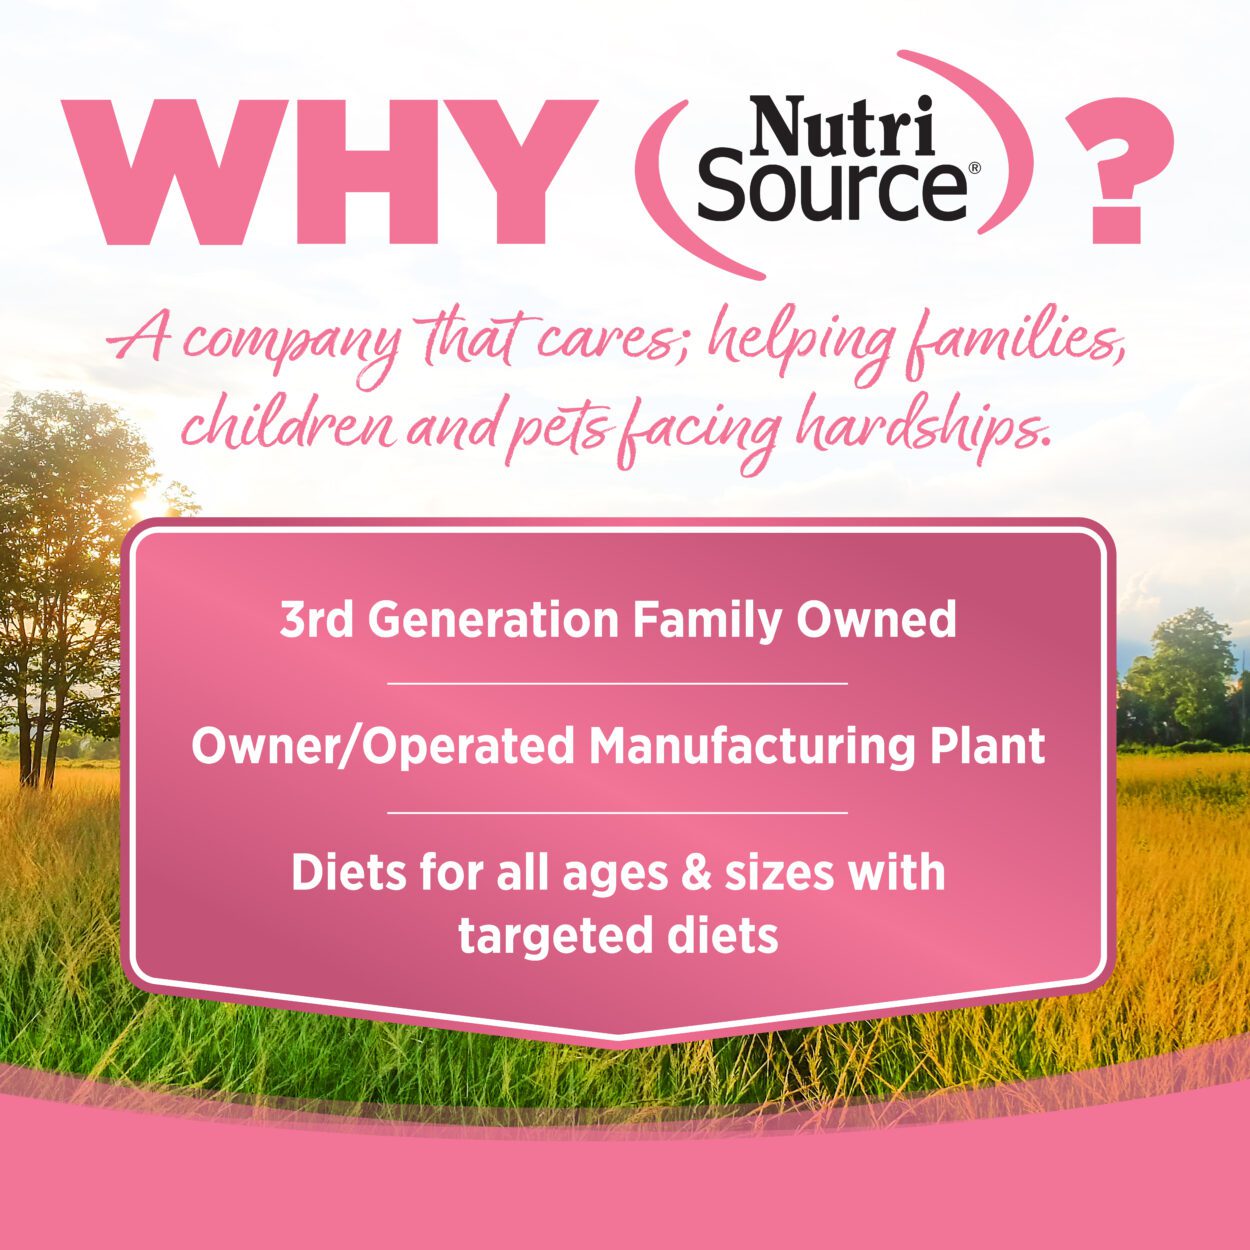 Why NurtiSource?